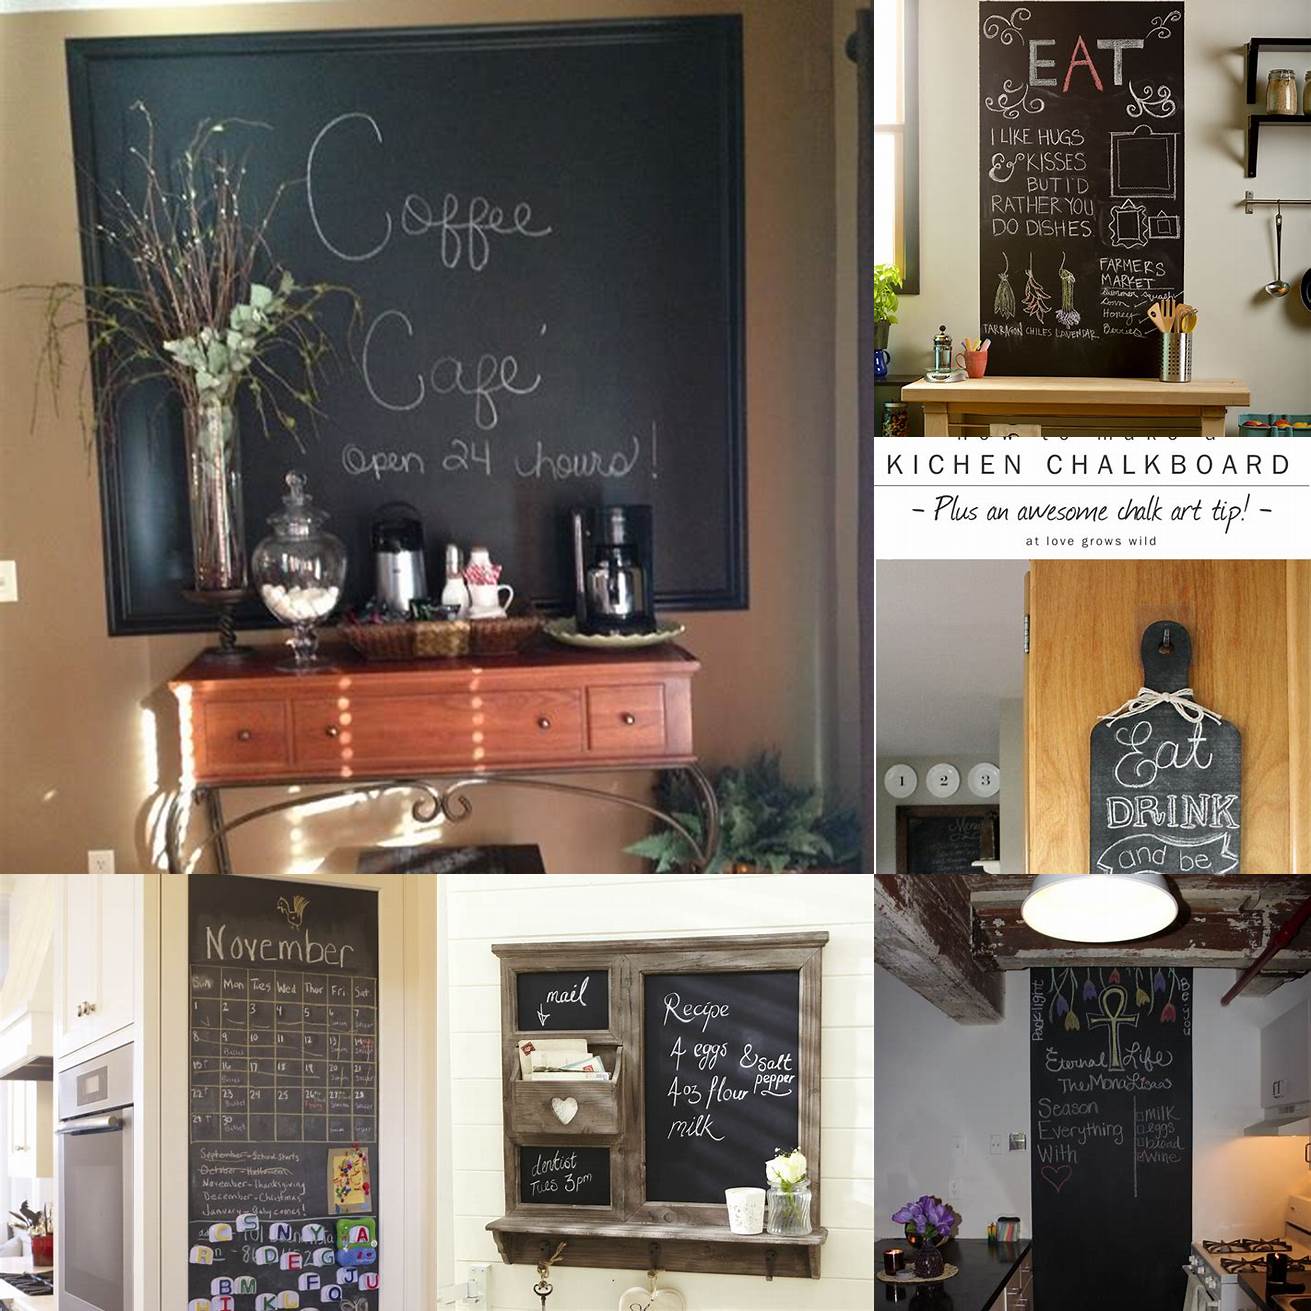 4 Communication The kitchen chalkboard can also be used for leaving messages and notes for family members Whether its a reminder to take out the trash or a love note for your spouse the chalkboard is a great way to communicate with your family